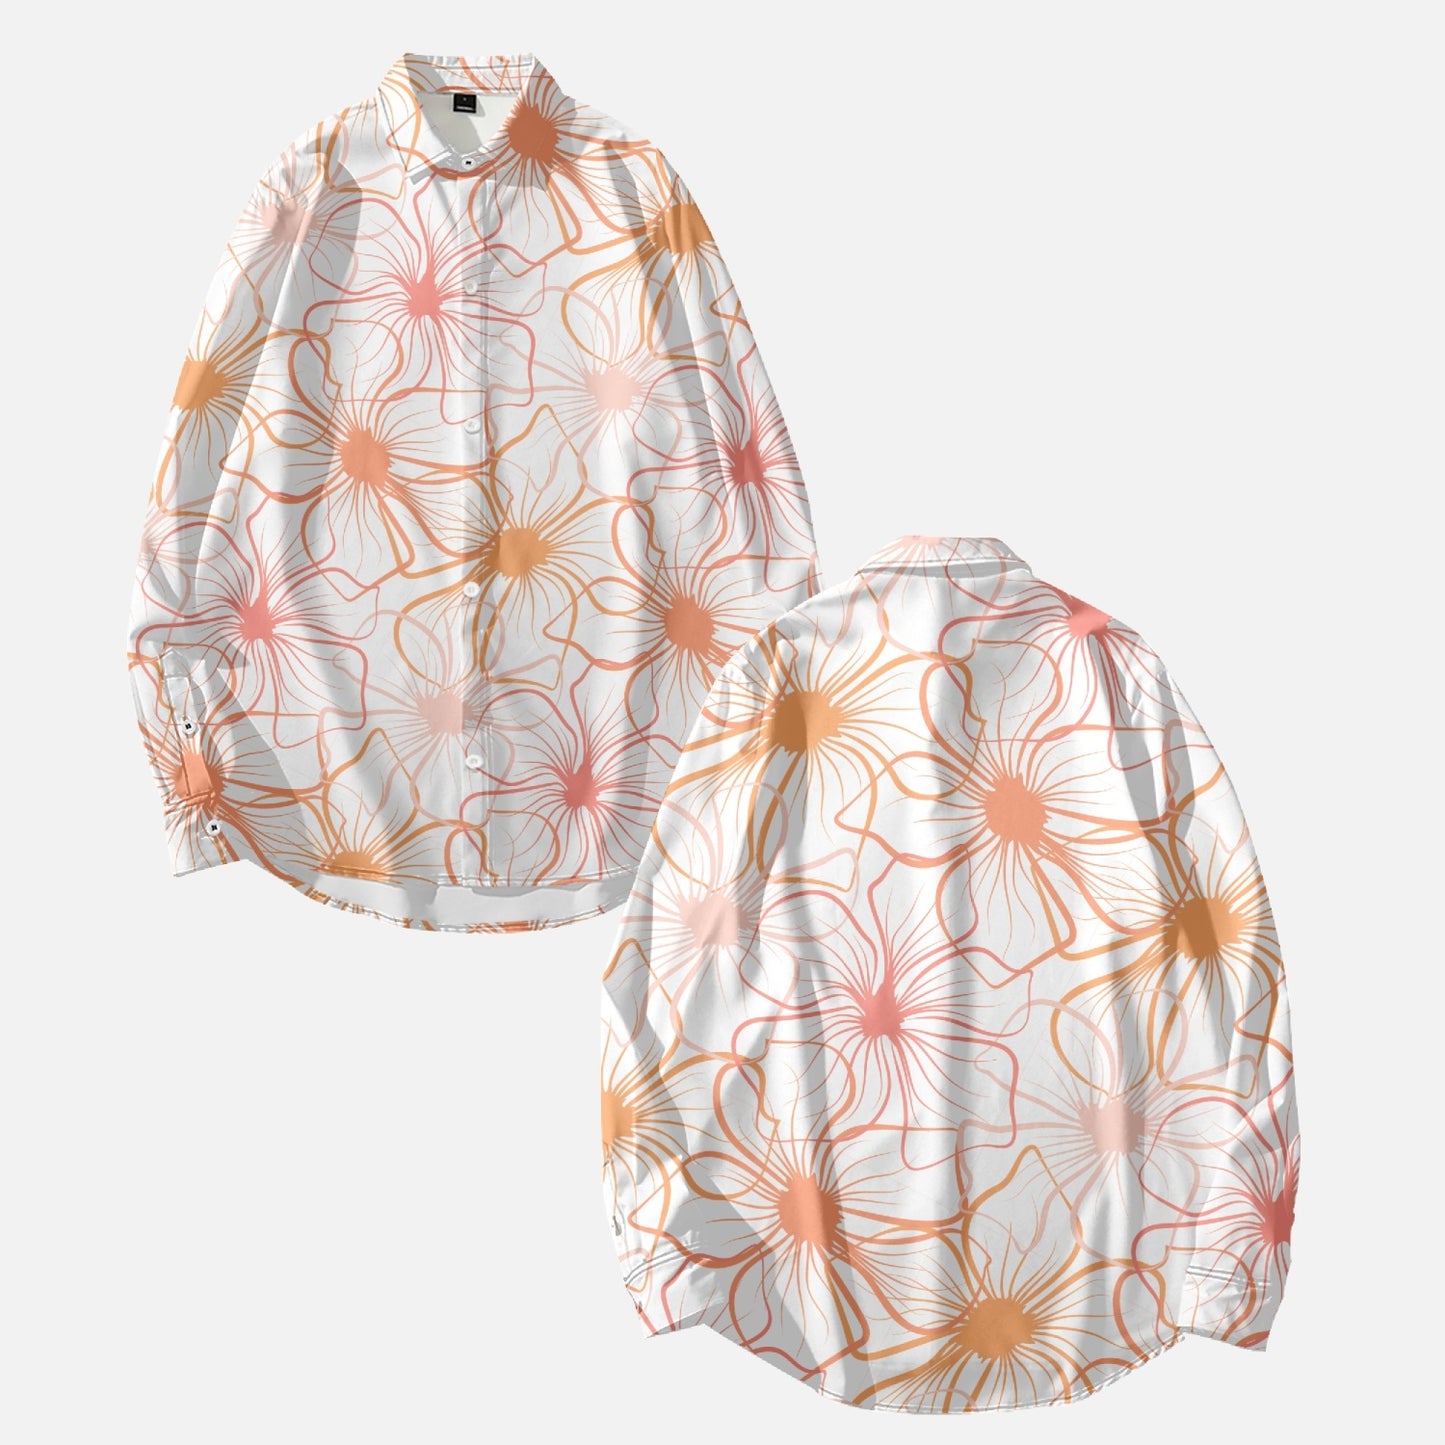 Overblown Floral Long Sleeve Shirts